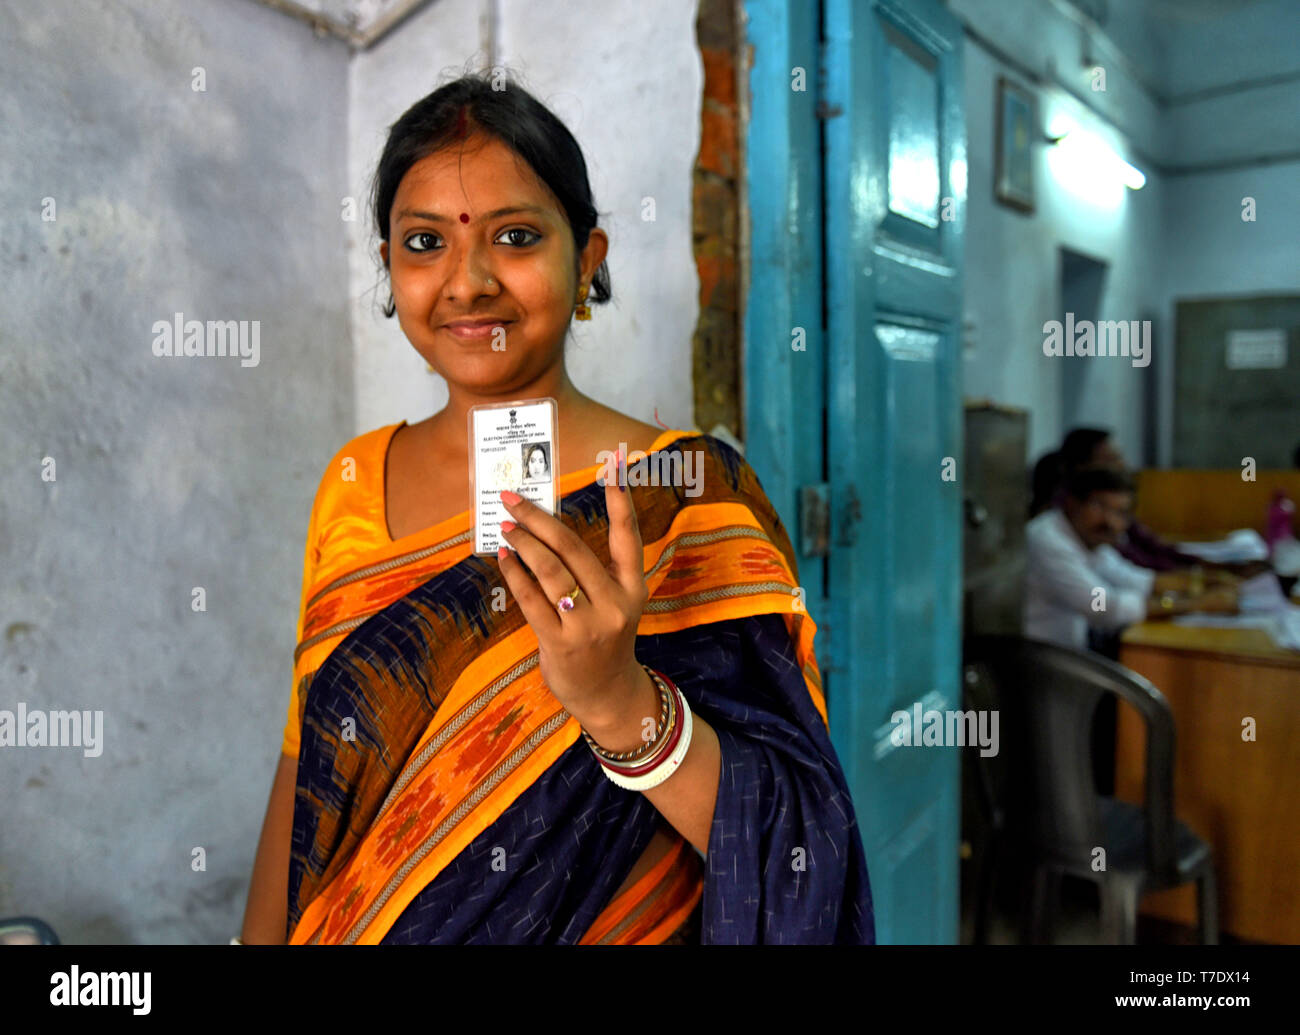 Barrackpore, WEST BENGAL, India. 6th May, 2019. A Young woman seen showing her ink marked finger after casting the vote at a polling station during the 5th Phase of General Elections of India. Credit: Avishek Das/SOPA Images/ZUMA Wire/Alamy Live News Stock Photo